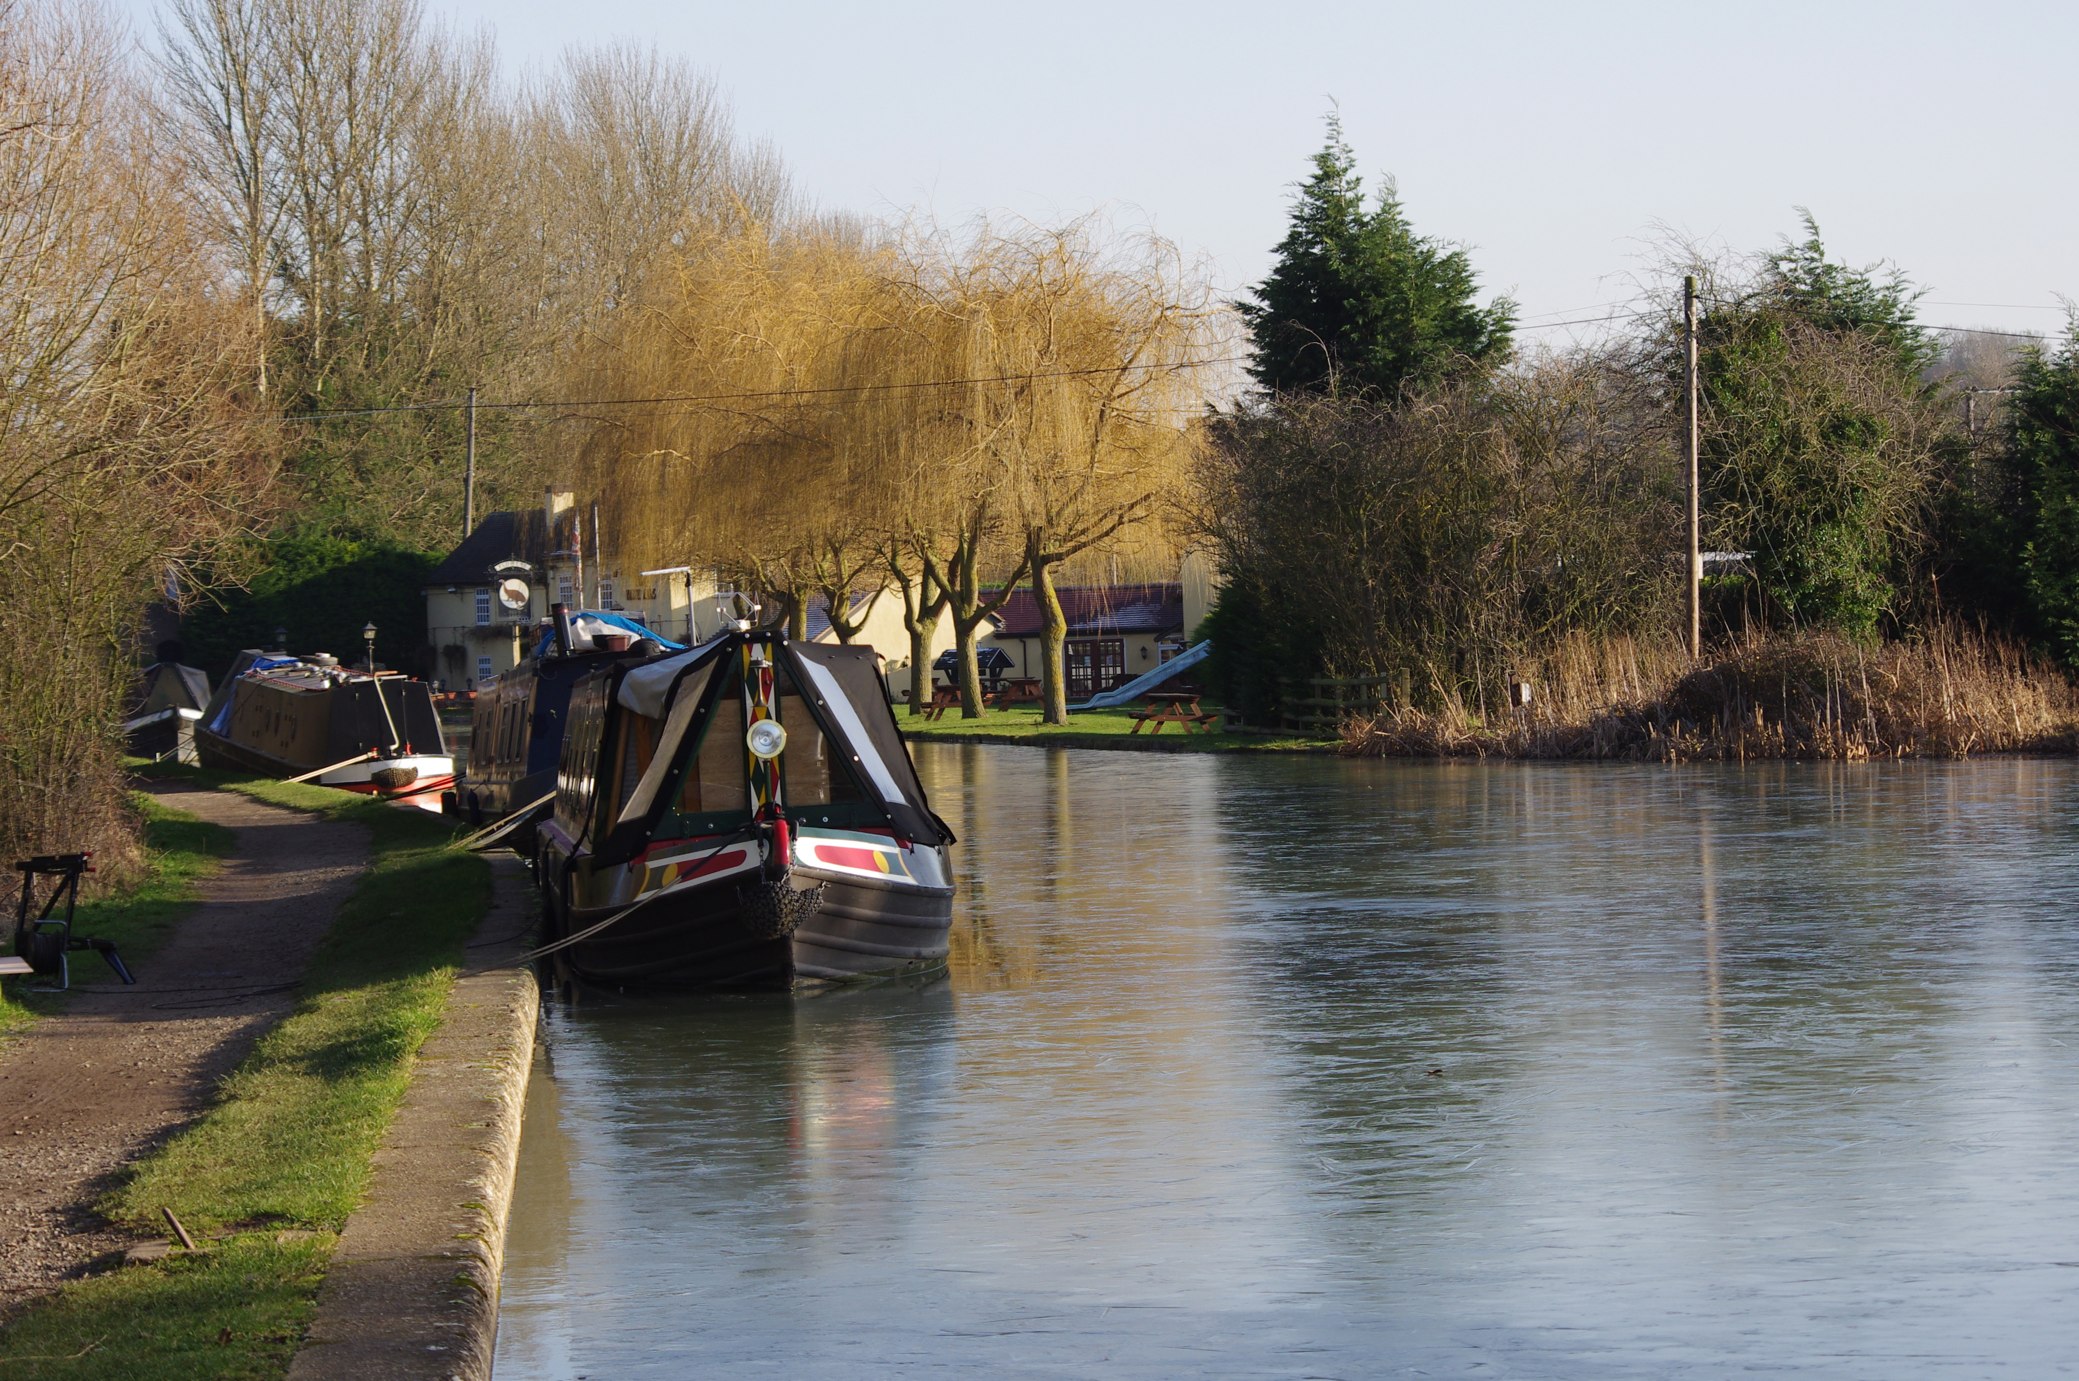 two narrow boats are docked in a canal